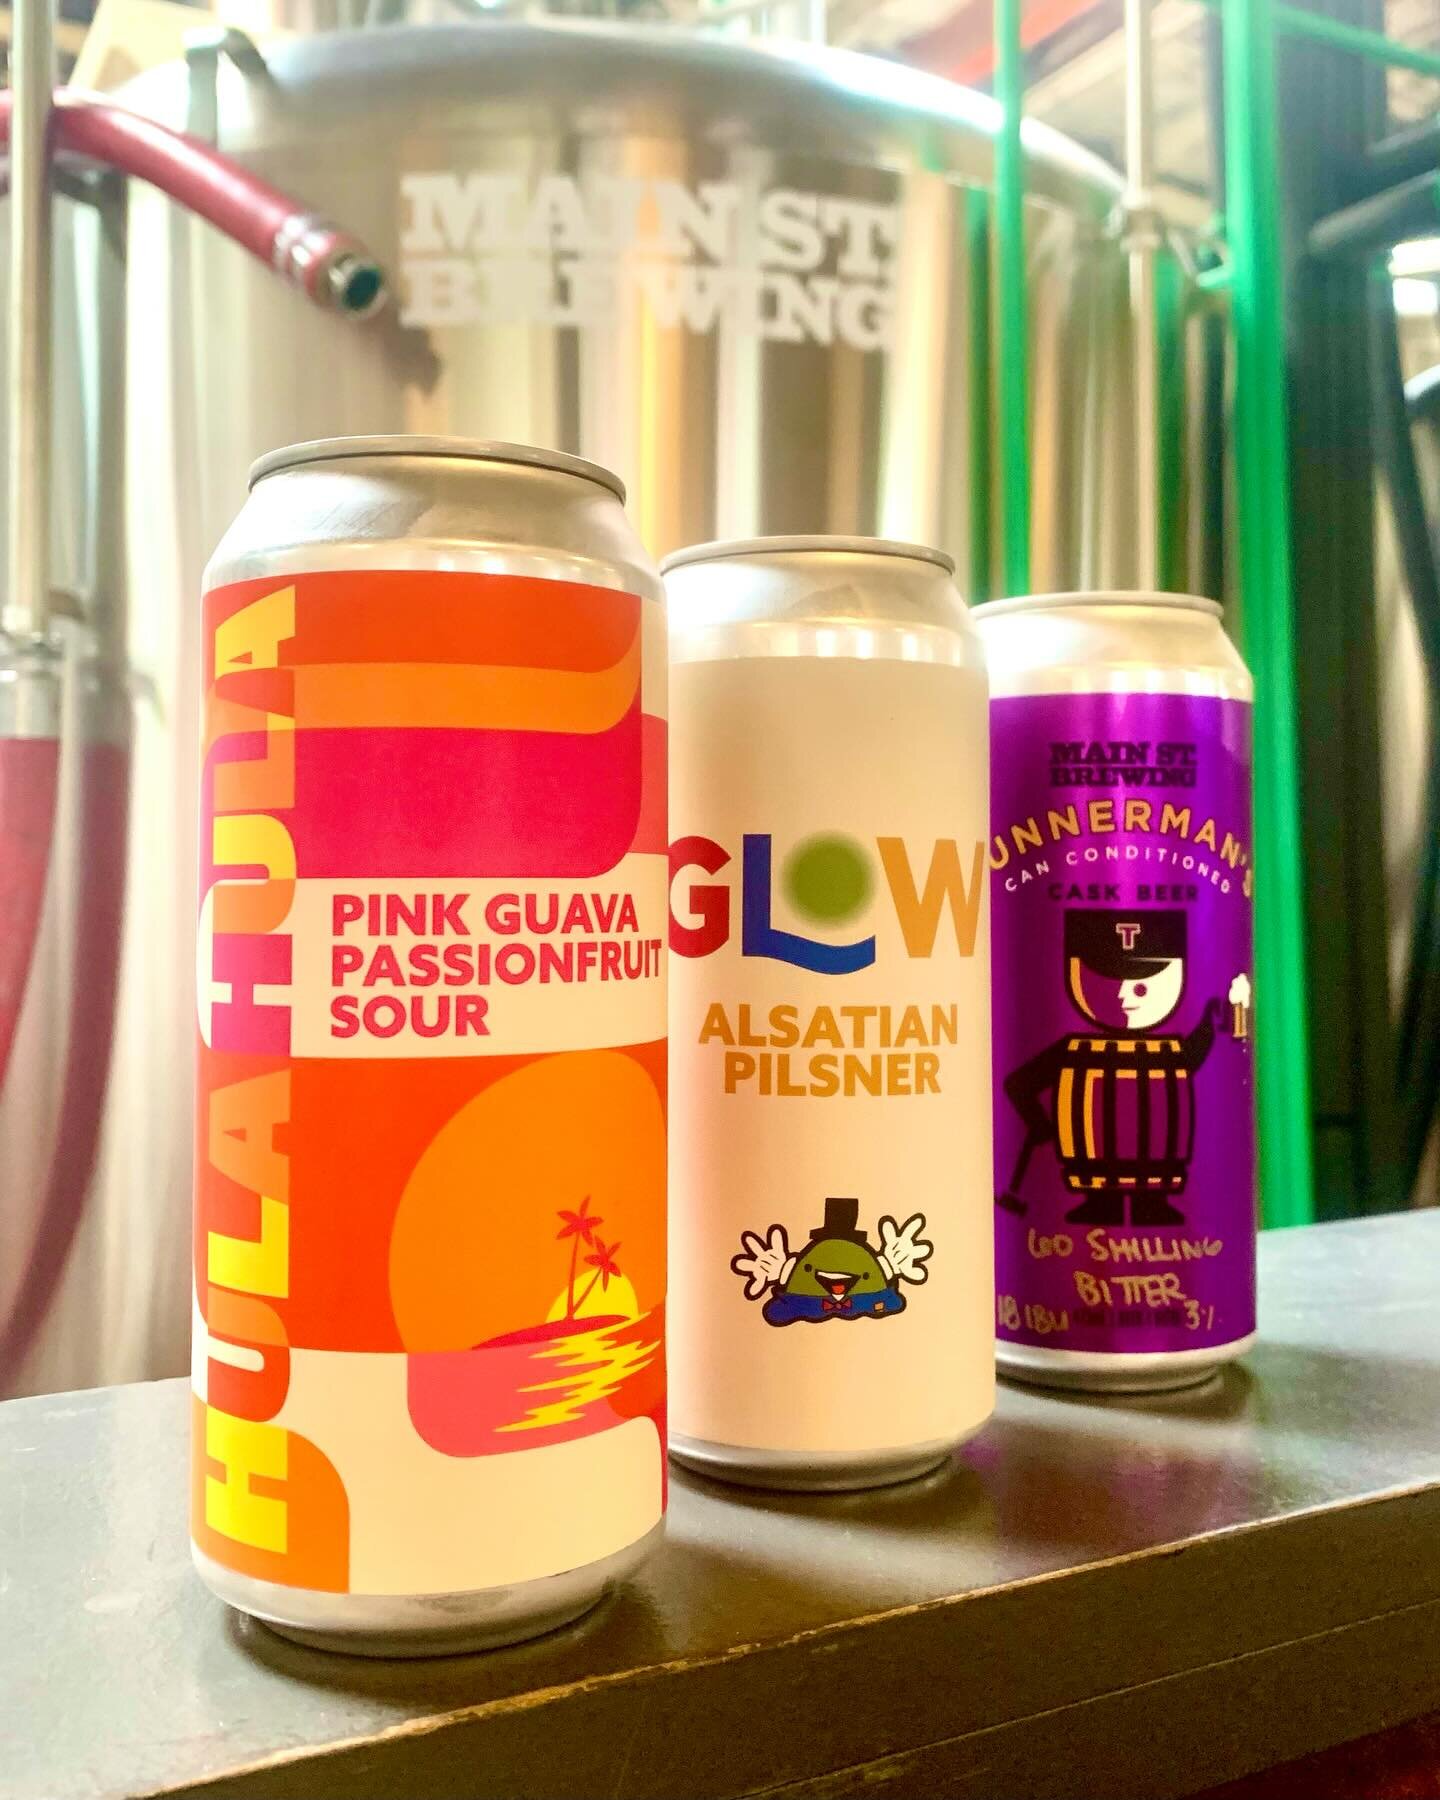 HAPPY #NATIONALBEERDAY!

Finally, one of those &lsquo;days&rsquo; we can really get BEHIND.

Here&rsquo;s a trio of our new releases to wet your appetite:

🌺 𝗛𝗨𝗟𝗔 𝗛𝗨𝗟𝗔 𝗣𝗜𝗡𝗞 𝗚𝗨𝗔𝗩𝗔 𝗣𝗔𝗦𝗦𝗜𝗢𝗡𝗙𝗥𝗨𝗜𝗧 𝗦𝗢𝗨𝗥 (𝟱.𝟰%)
⭐️ 𝗚𝗟𝗢?